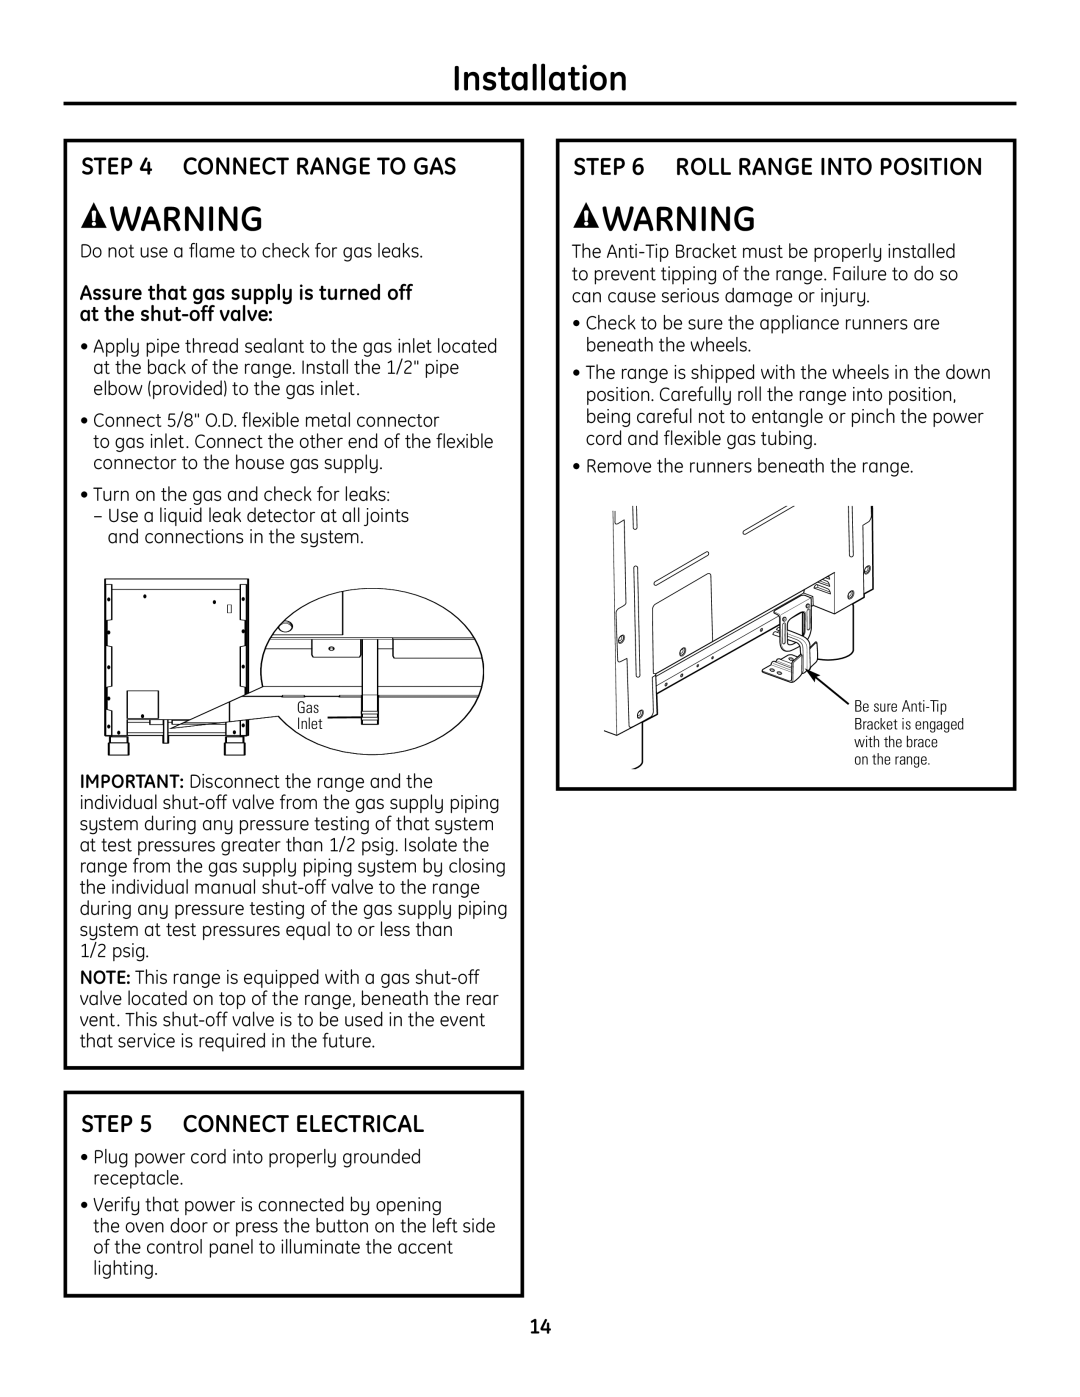 GE Monogram installation instructions Connect Range To Gas, Roll Range Into Position, Connect Electrical, Installation 